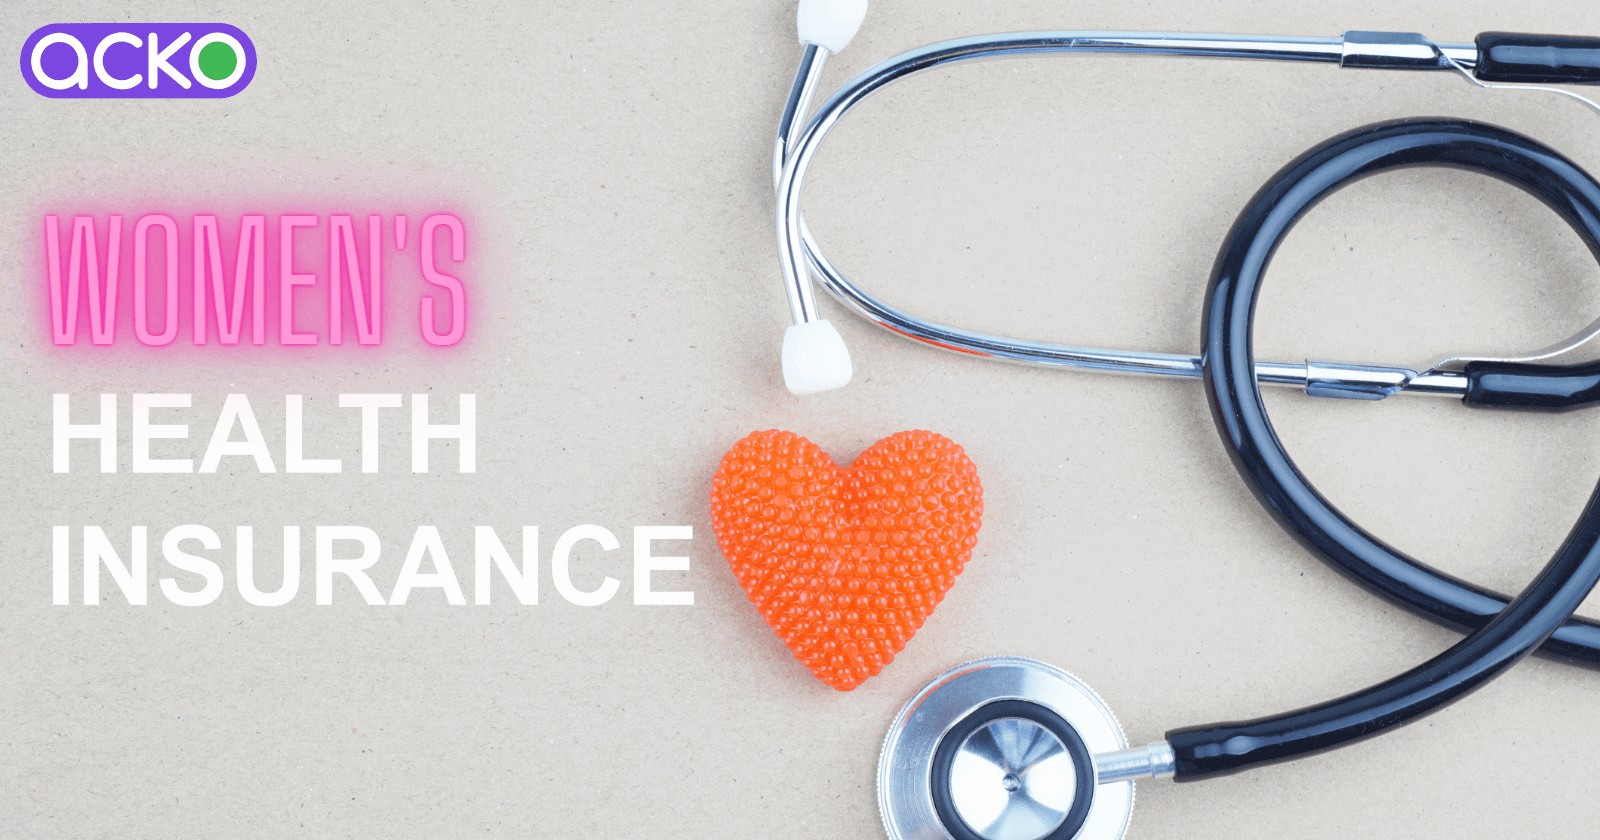 Why Do Women Need A Separate Health Insurance?